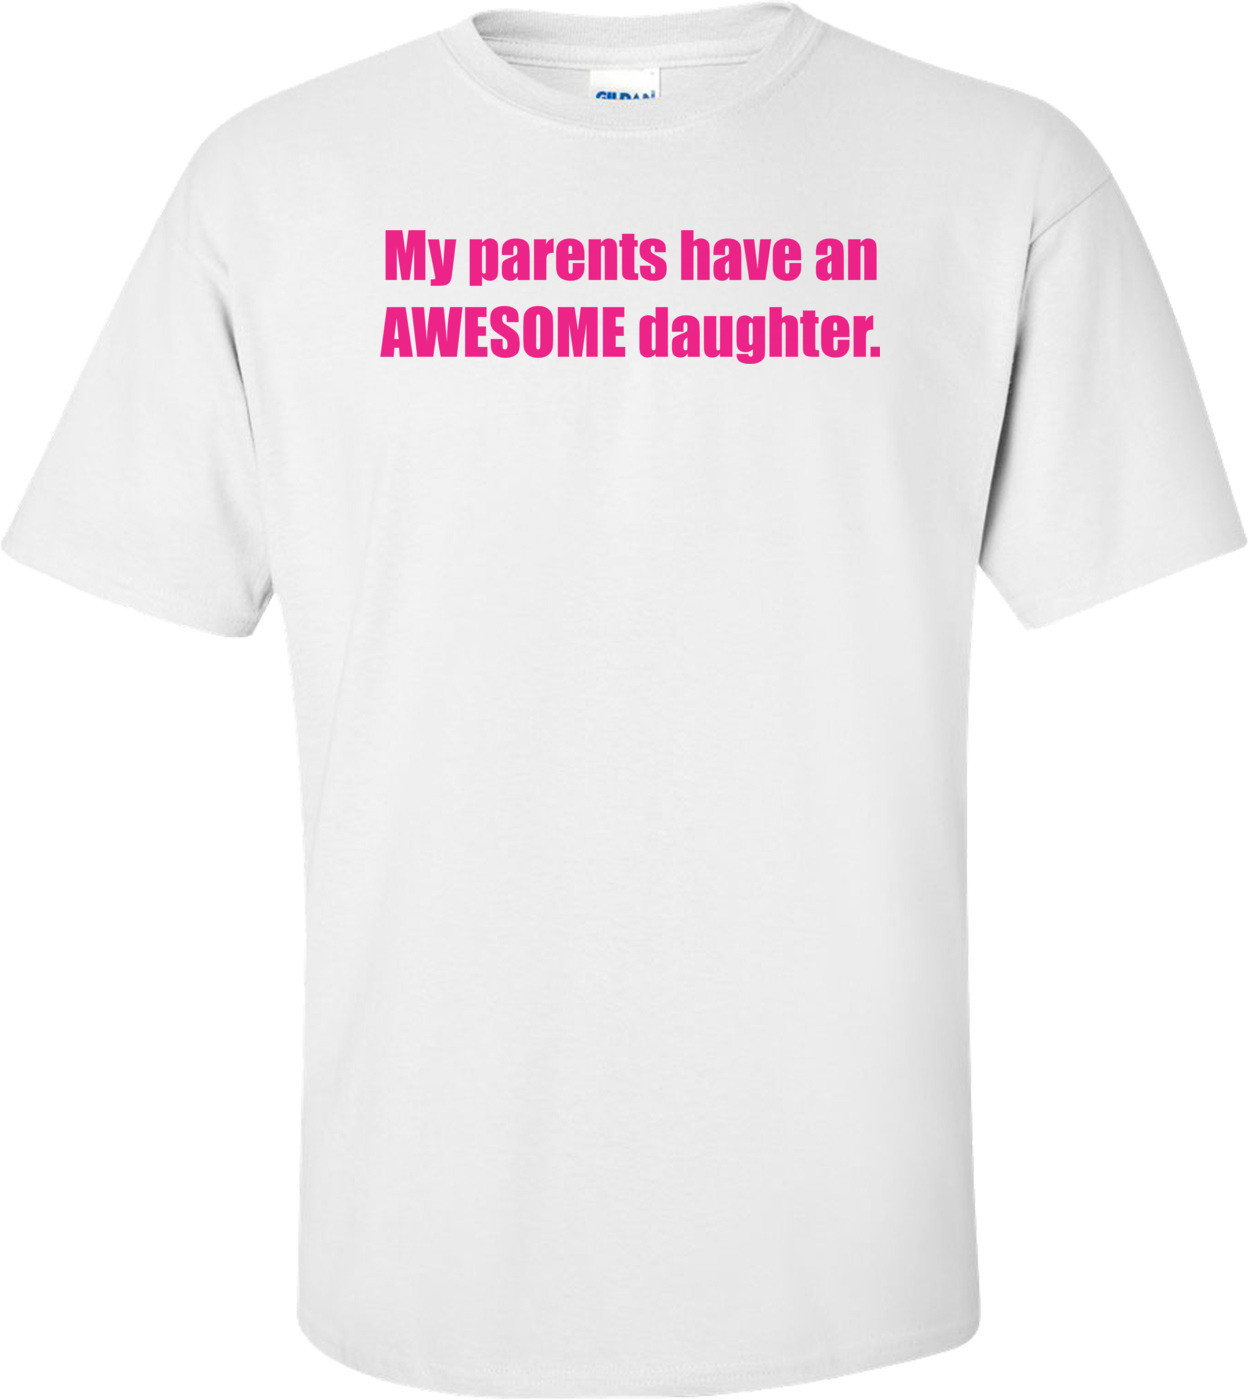 My Parents Have An Awesome Daughter. Shirt